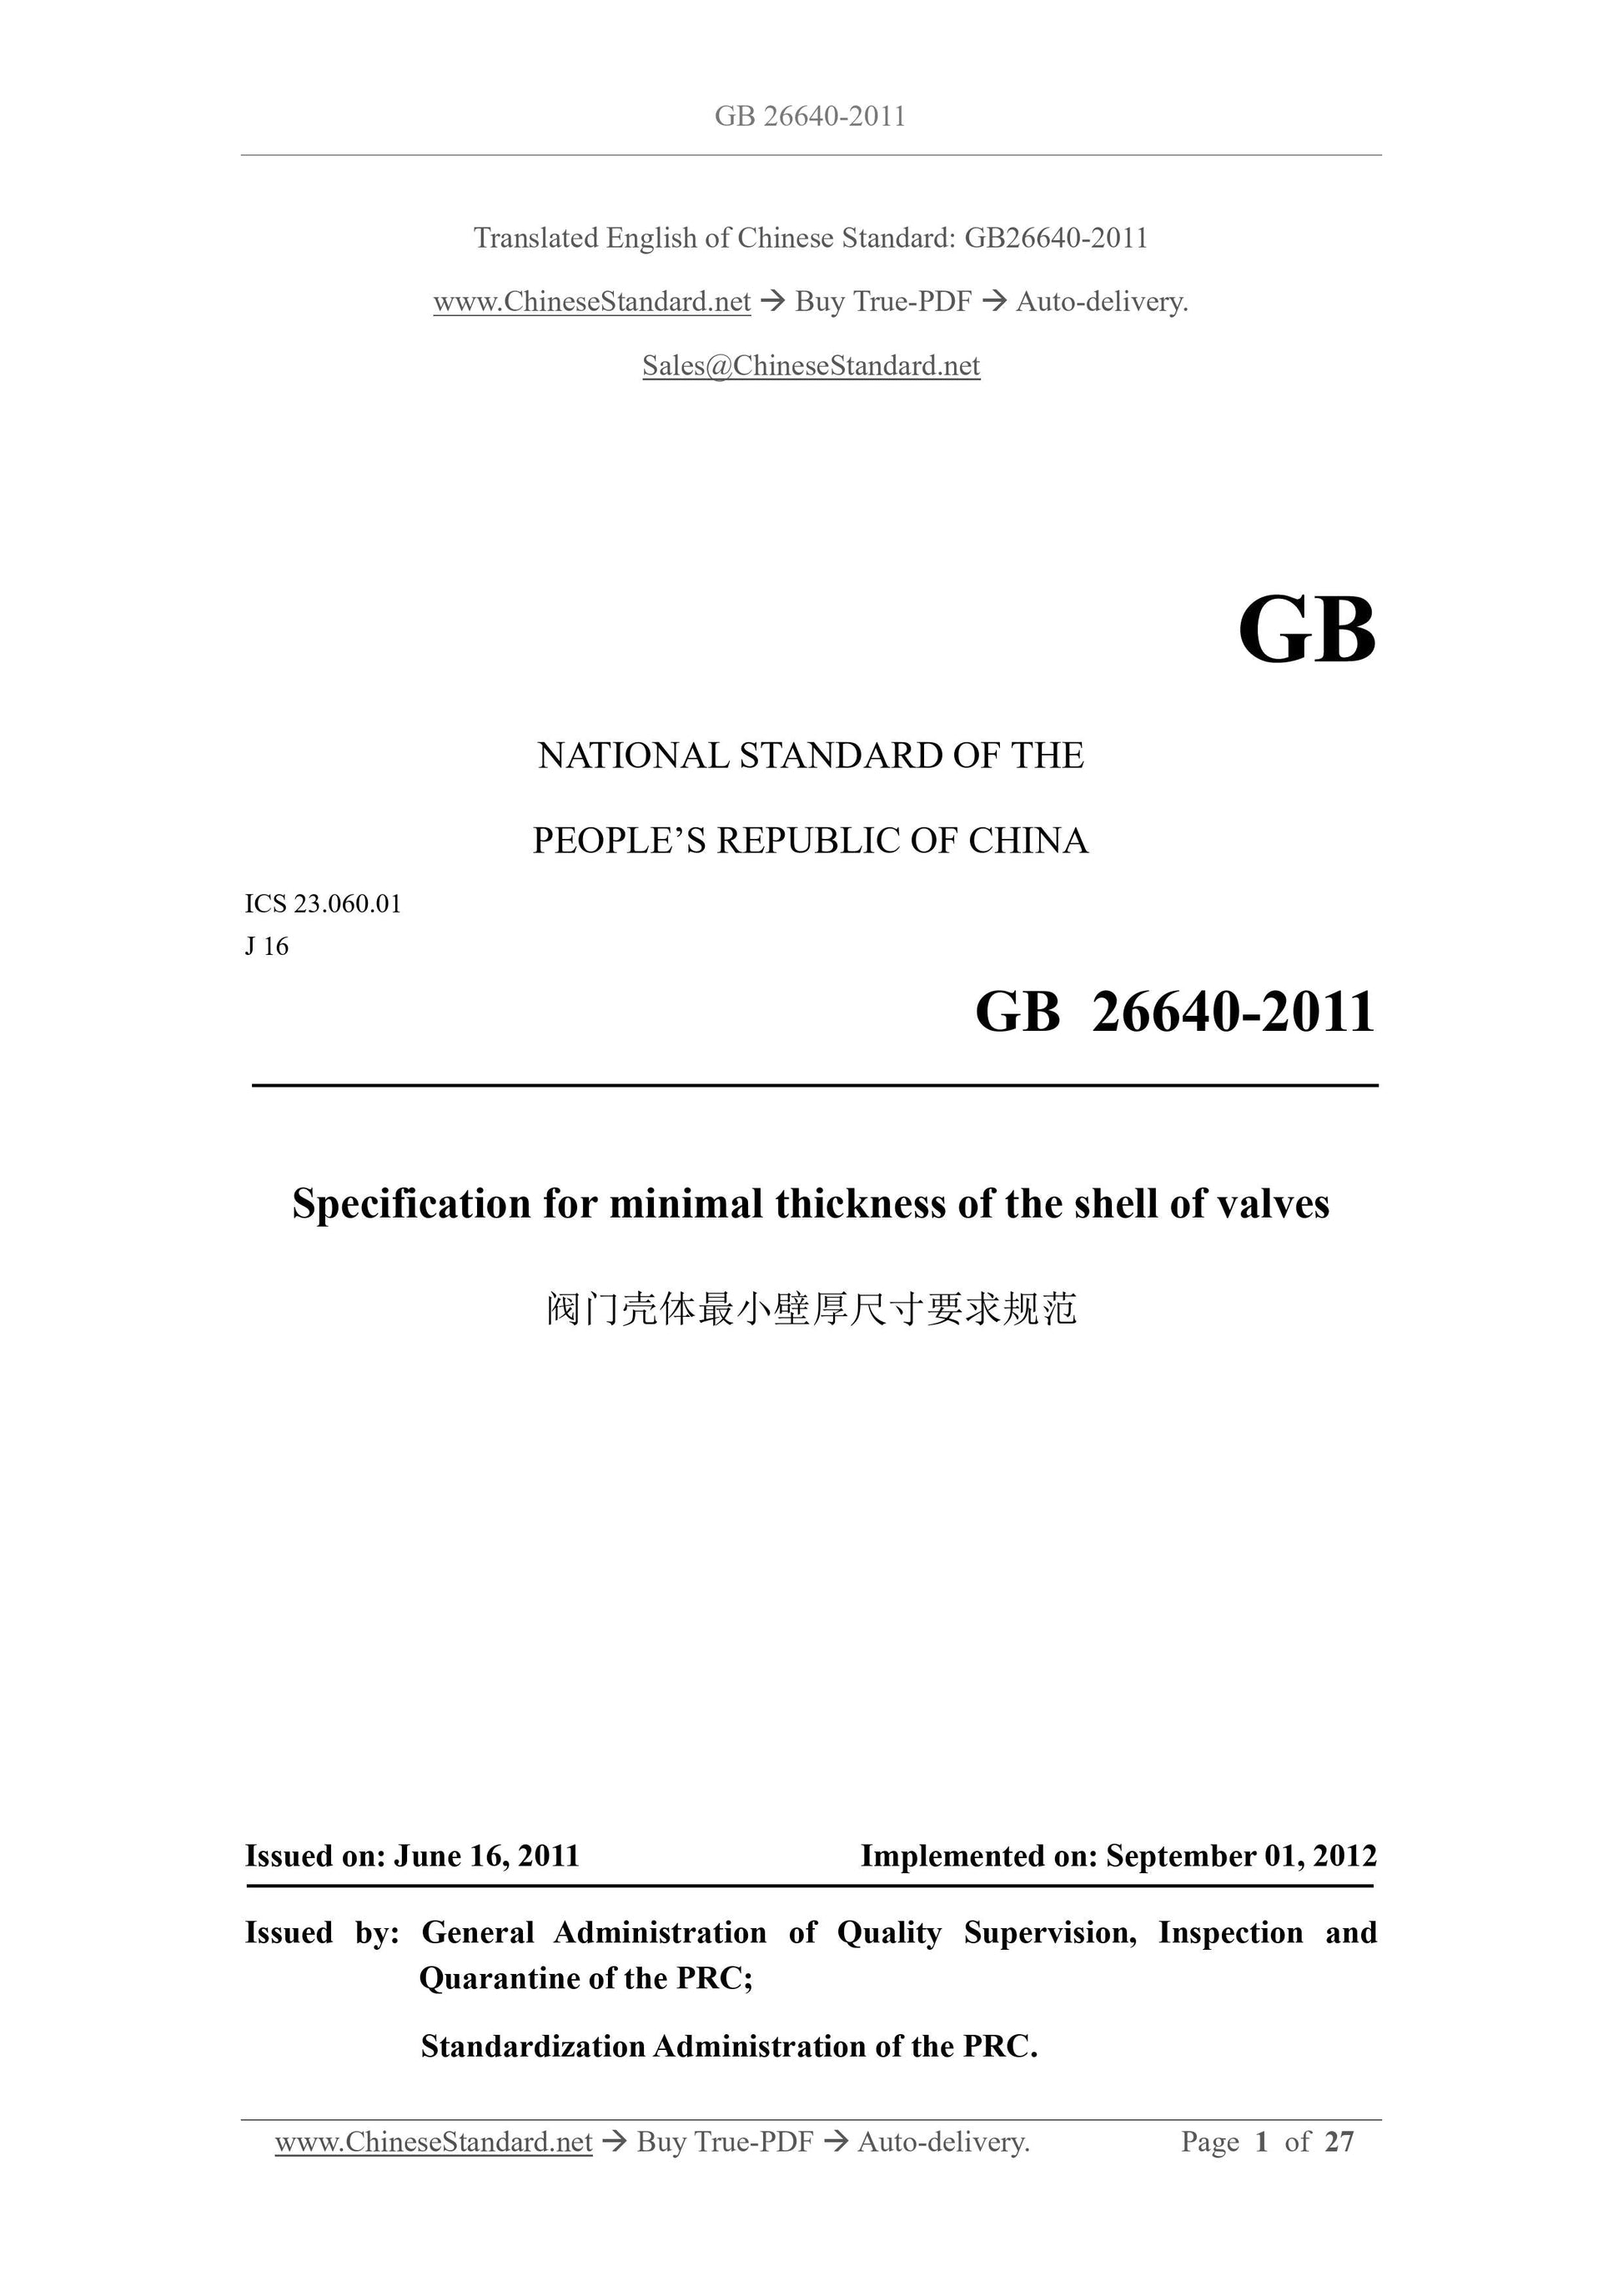 GB 26640-2011 Page 1